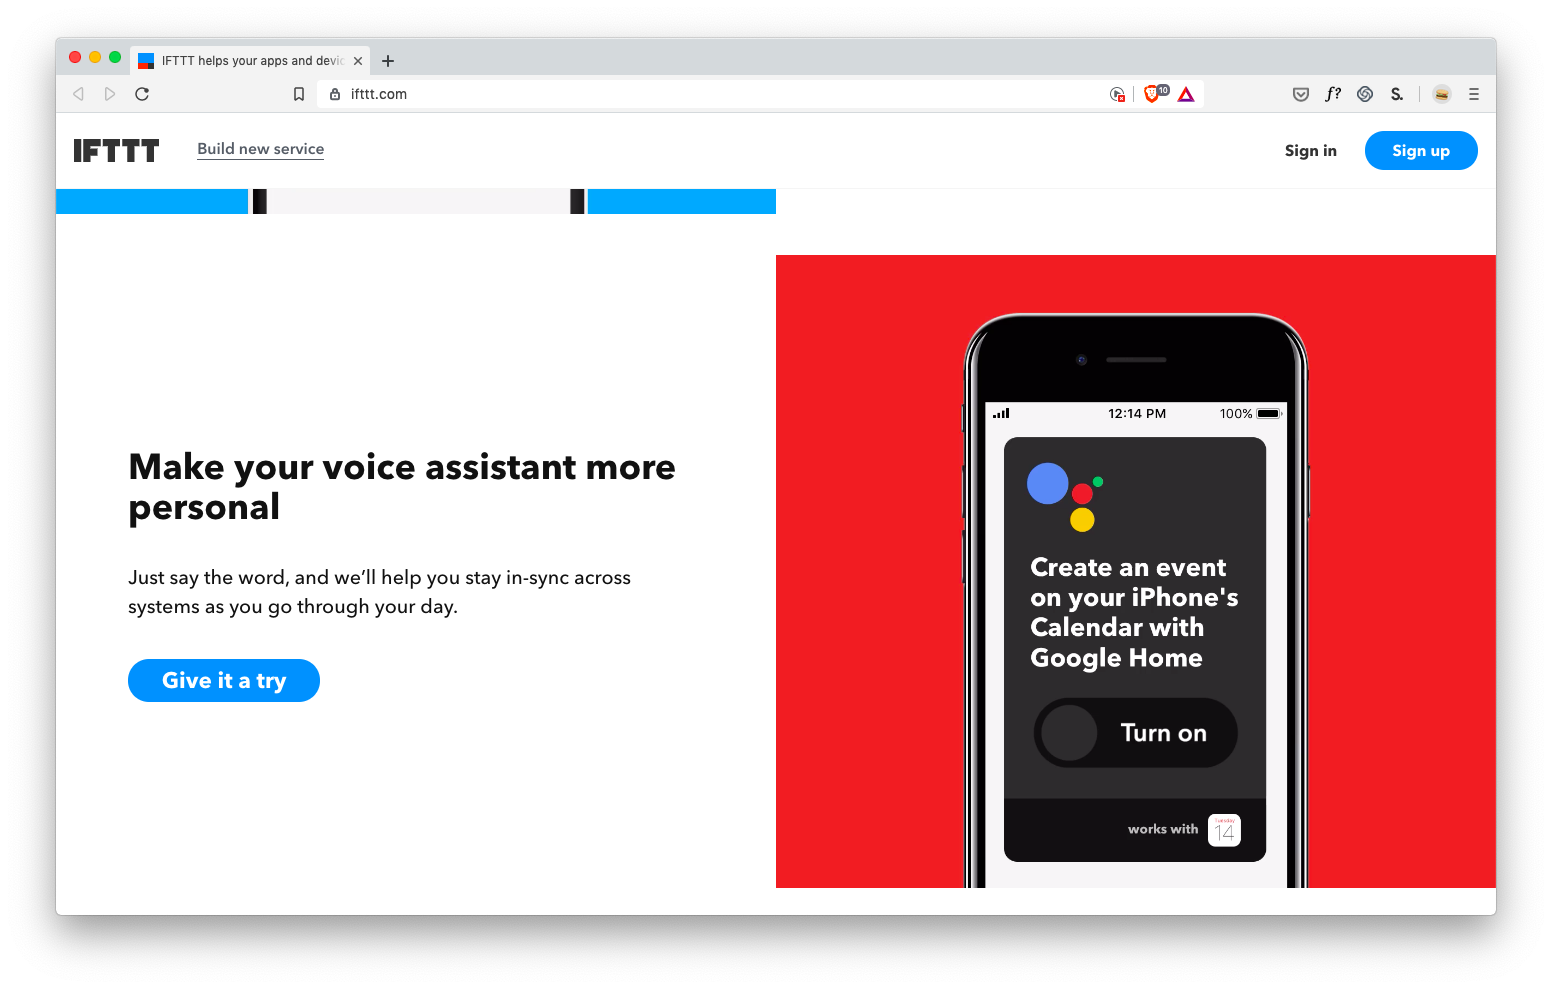 IFTTT UI teaches by example